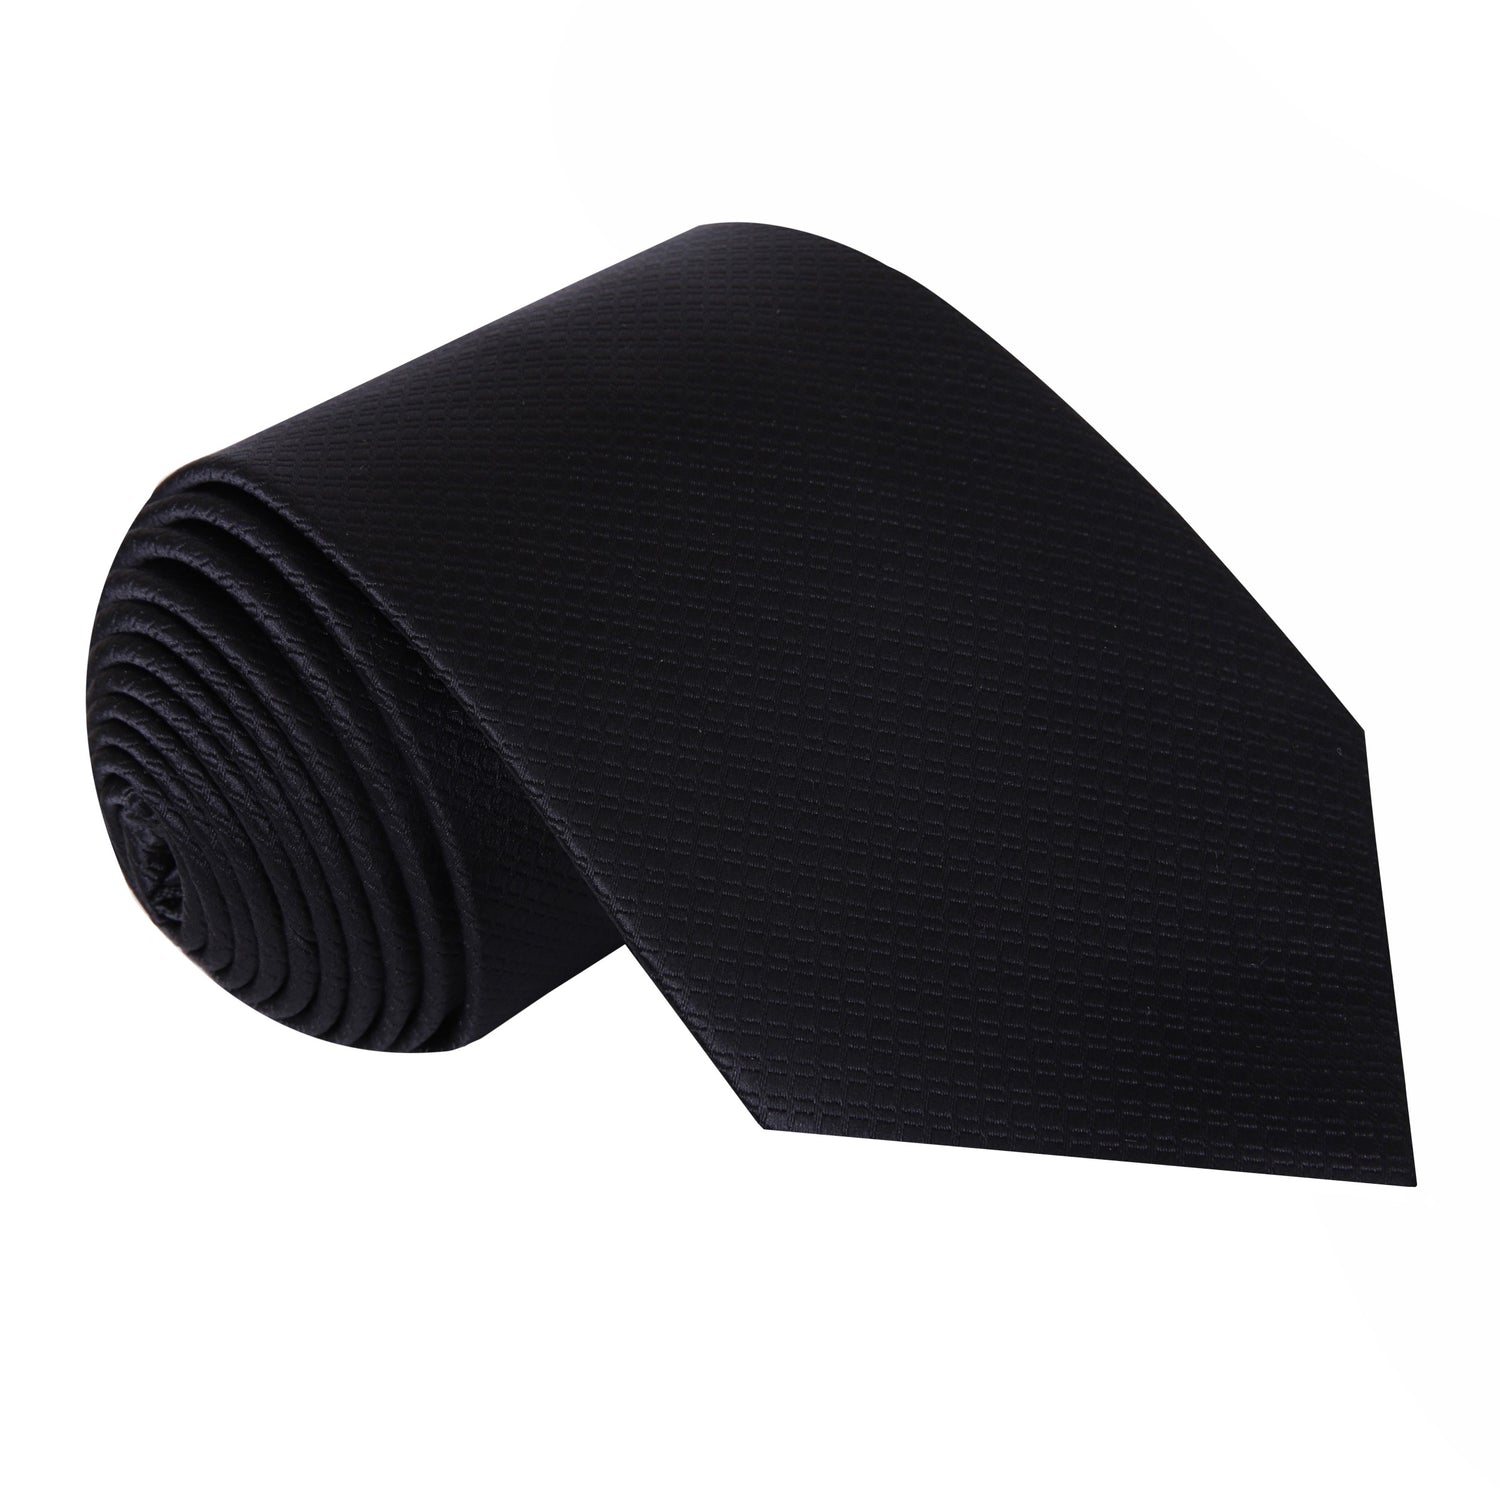 A Solid Black Tie With Small Check Texture Pattern Silk Necktie  